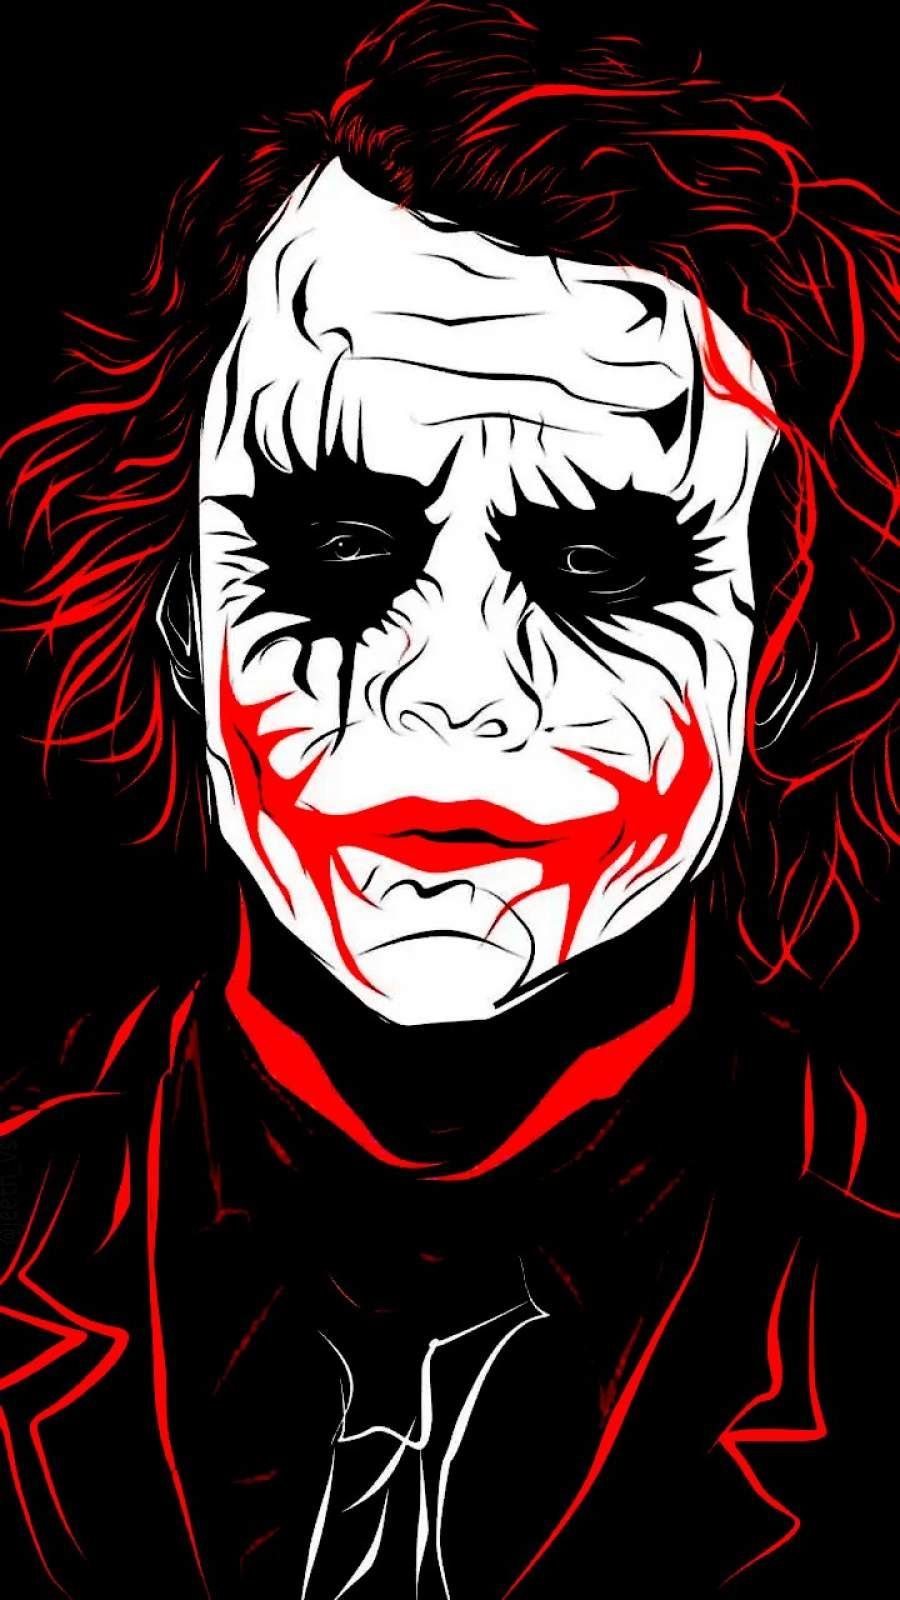 Joker Heath Ledger With Card  IPhone Wallpapers  iPhone Wallpapers